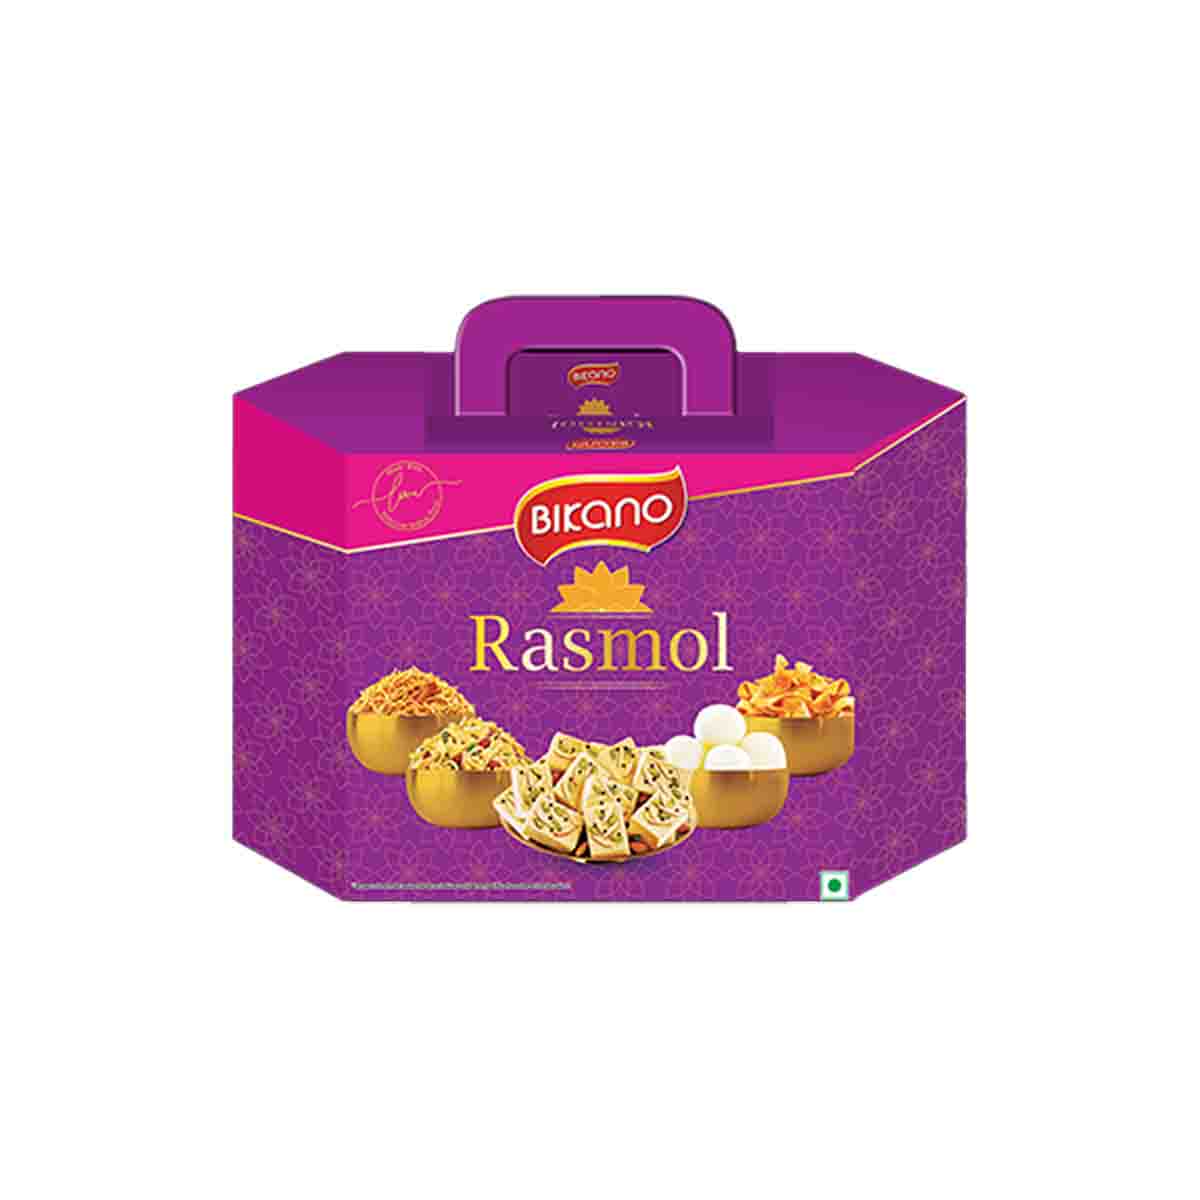 A range of Diwali packs for your family and friends from Bikano.